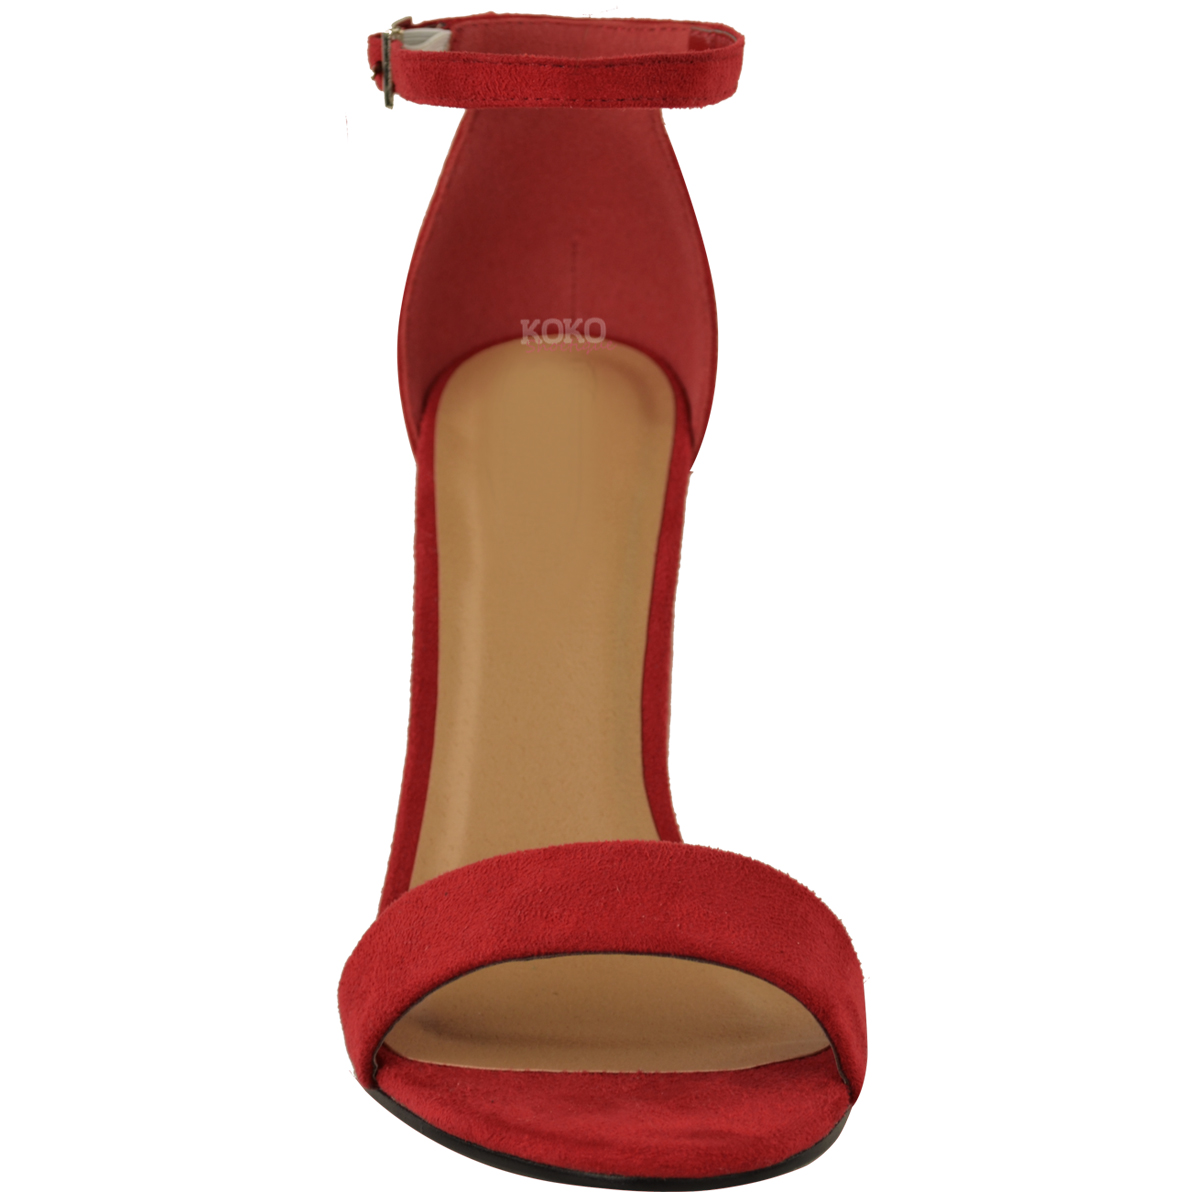 red strappy sandals mid heel